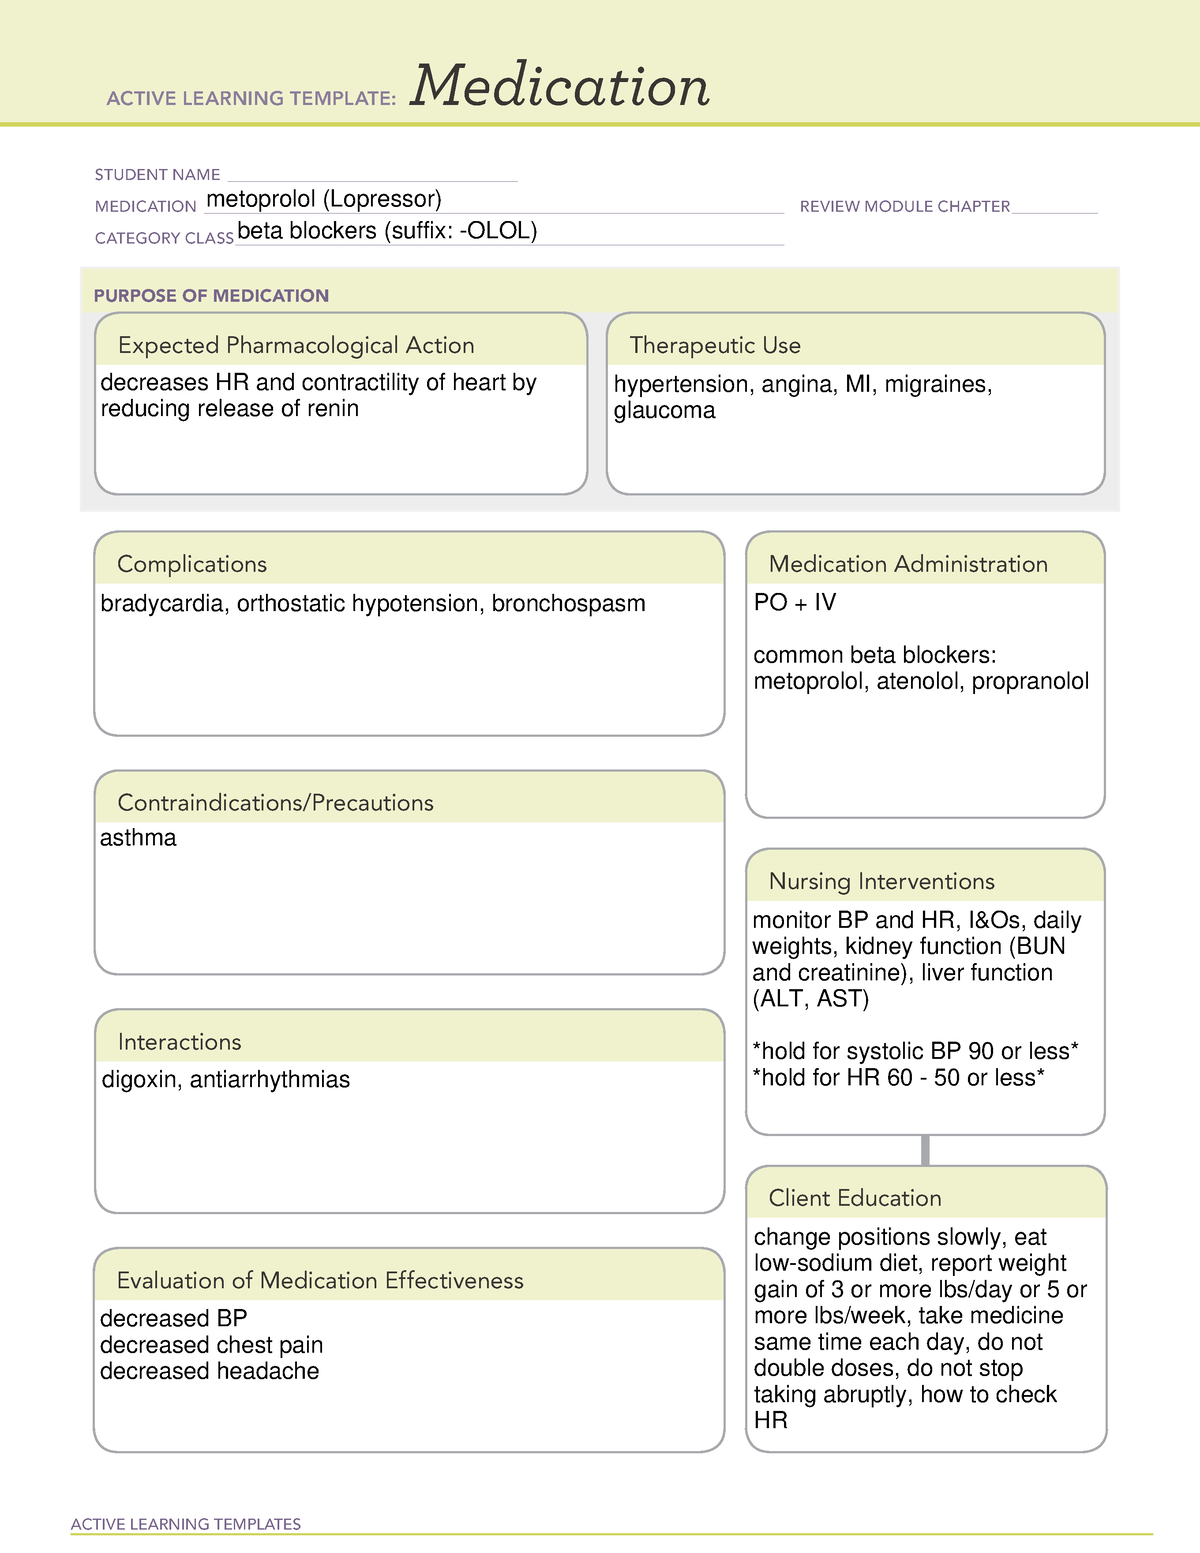 medication-template-metoprolol-active-learning-templates-medication-student-name-studocu